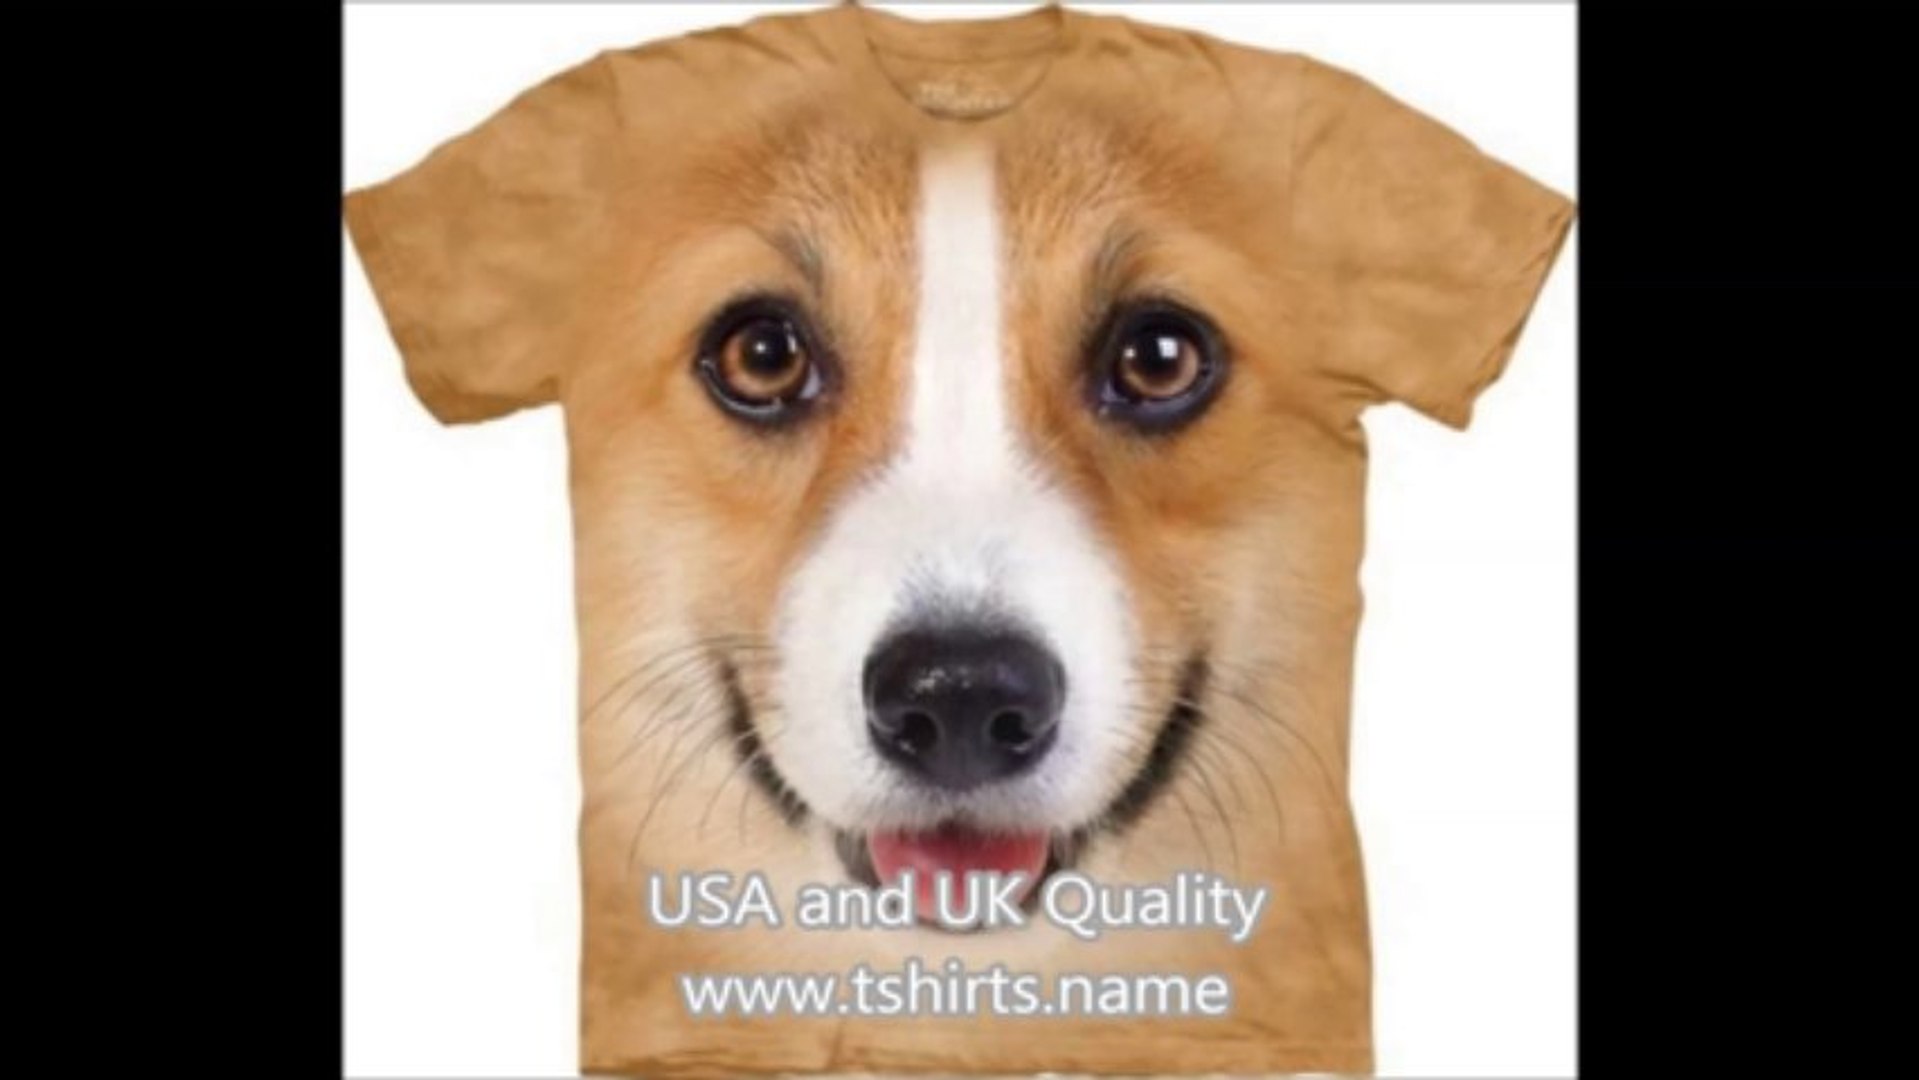 T-Shirts and Tees with Animals, Pets, Nature